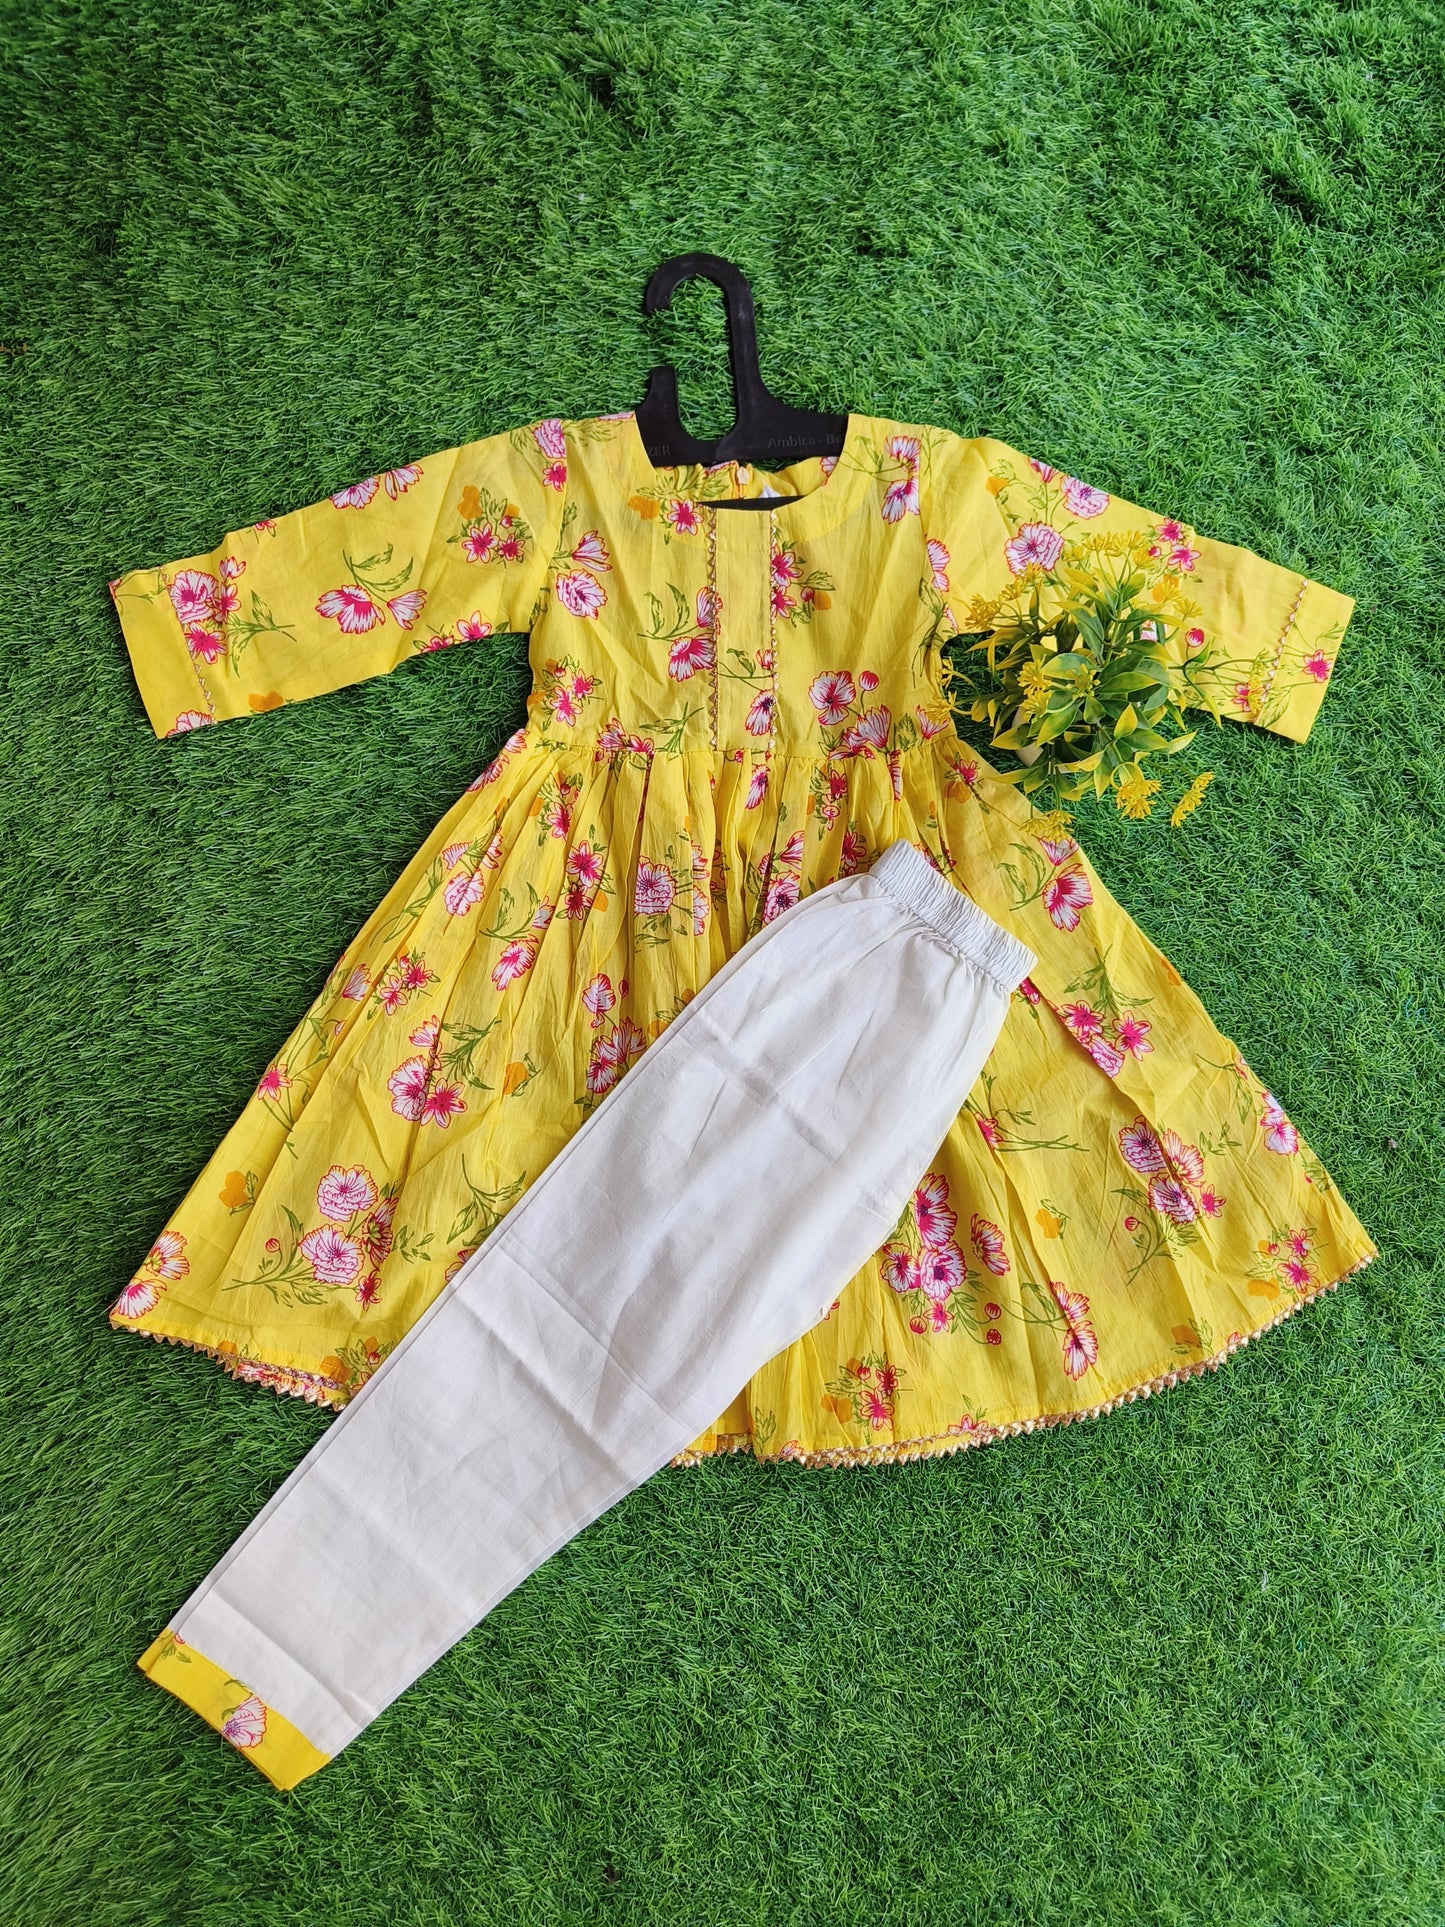 Indian Yellow Flowered Printed Kurti and Plain White Pant Outfit for Girl